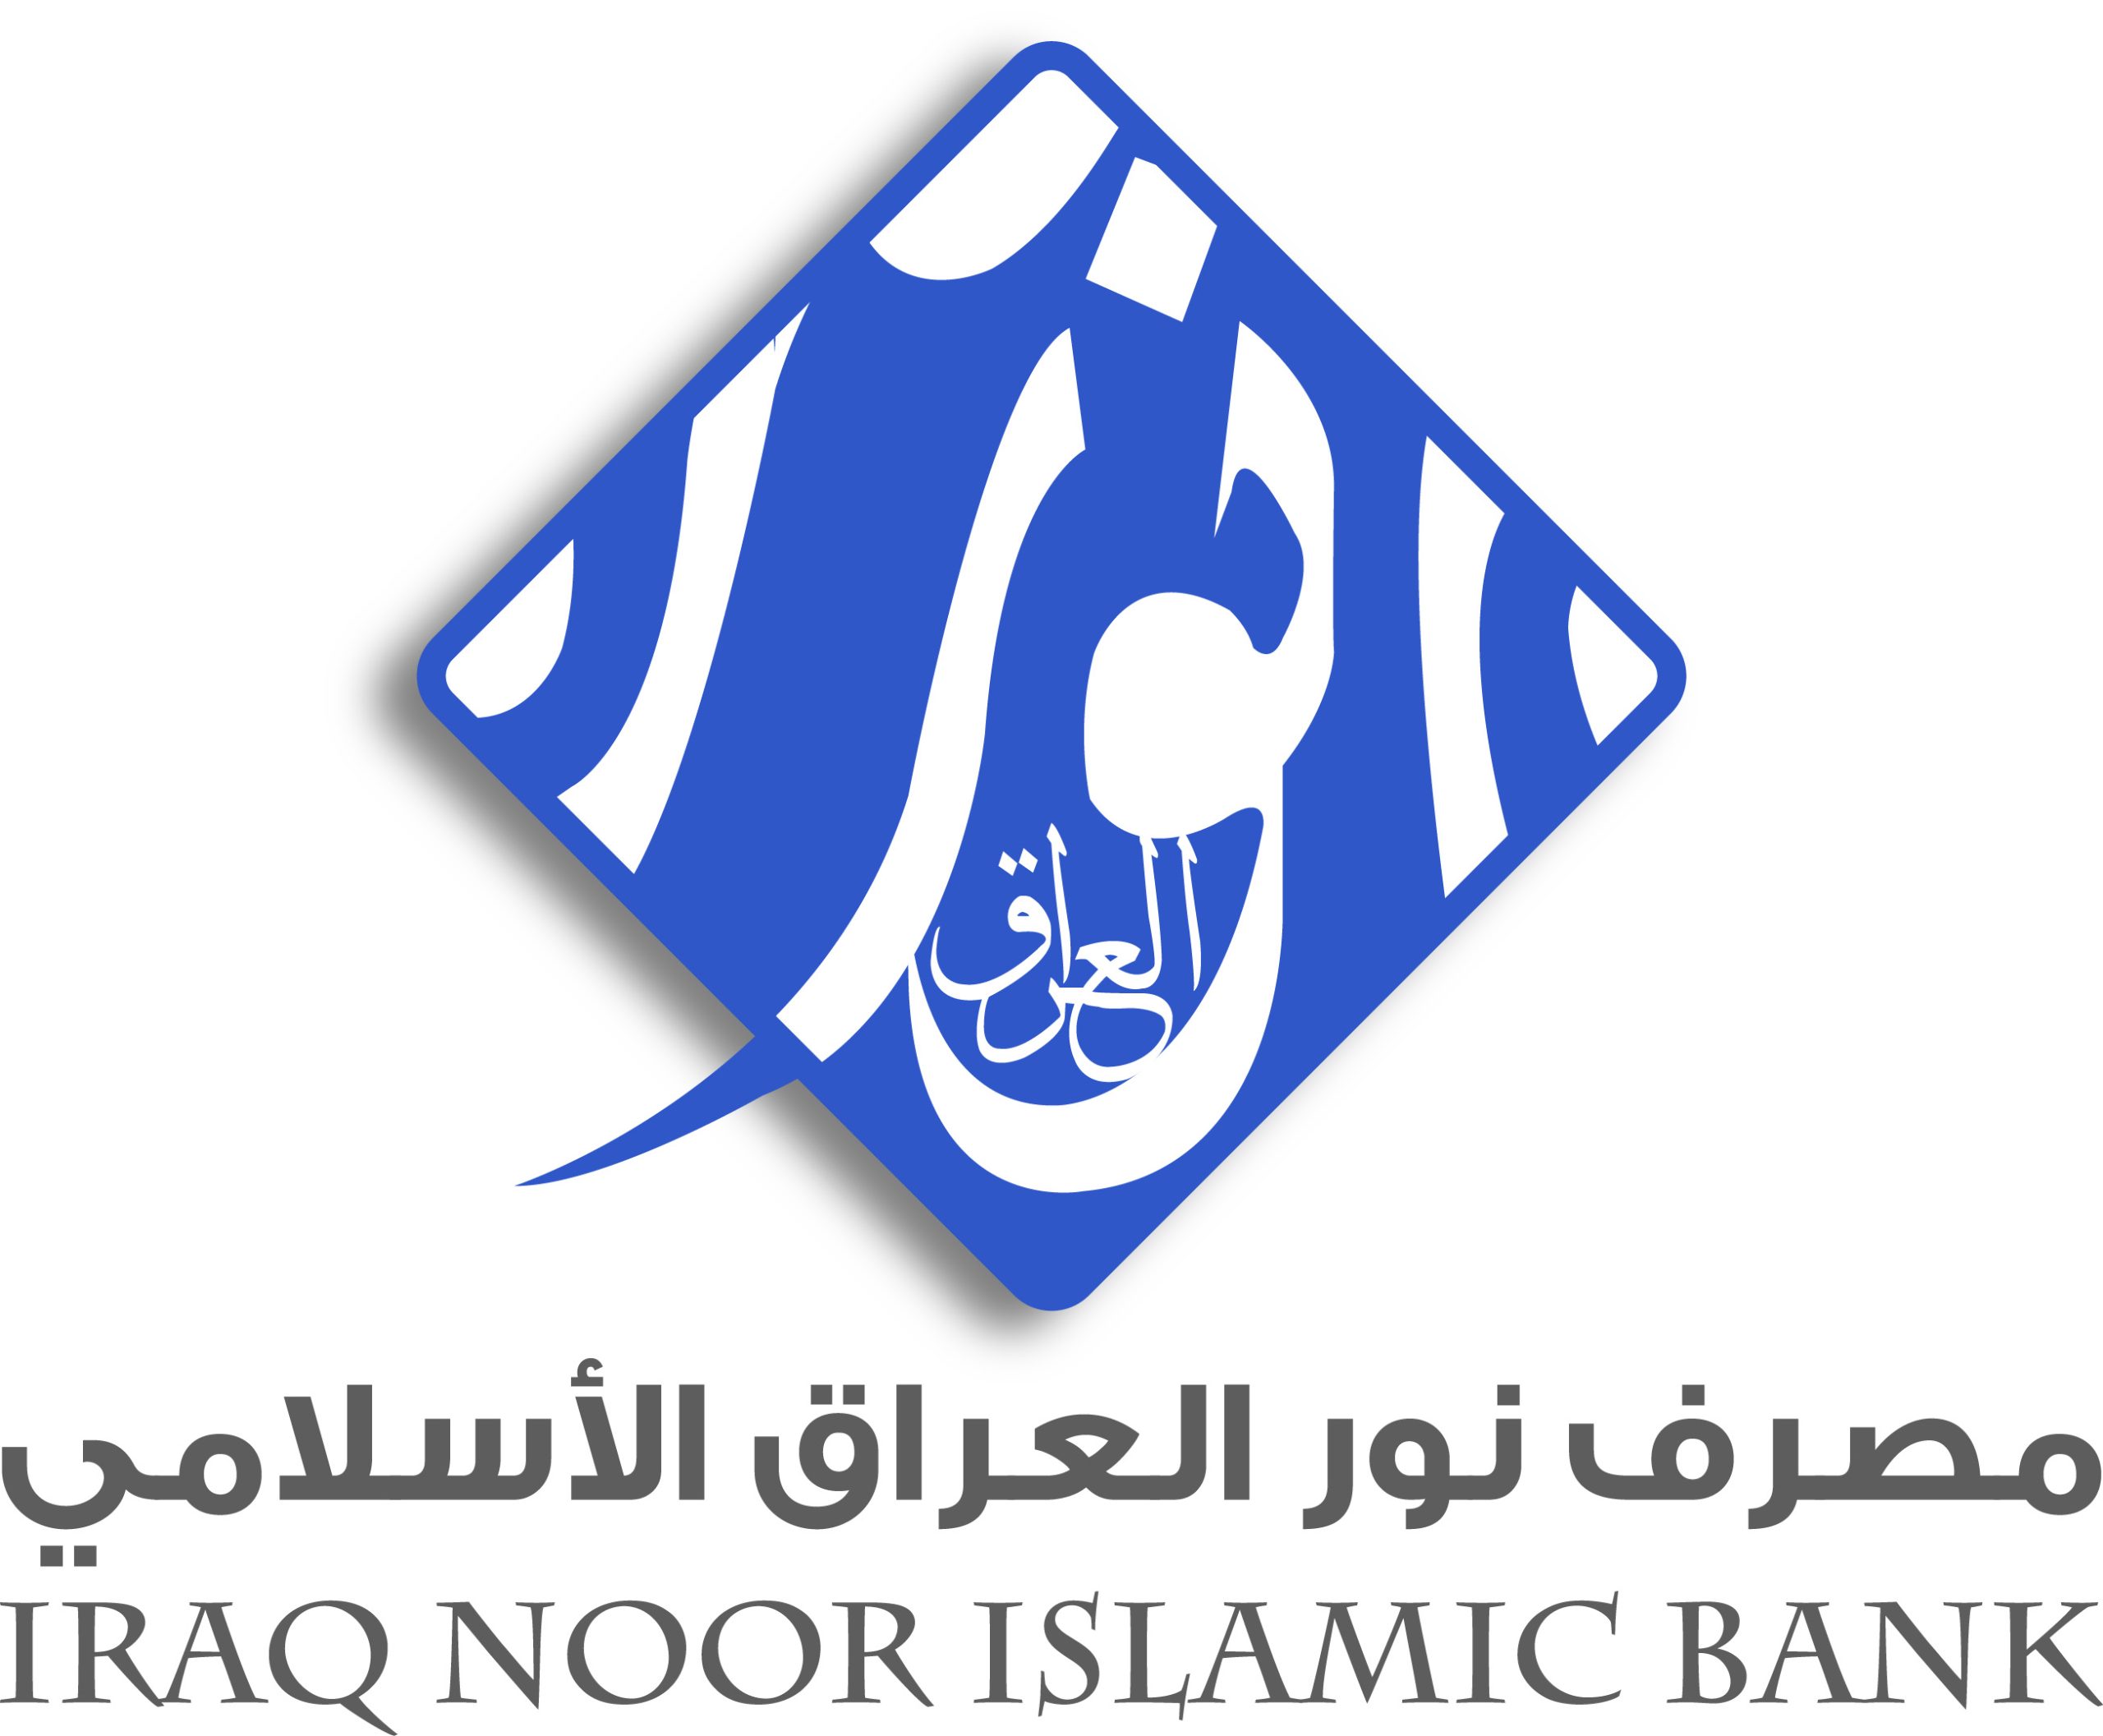 You are currently viewing General Assembly Meeting of Iraq Noor Islamic Bank 